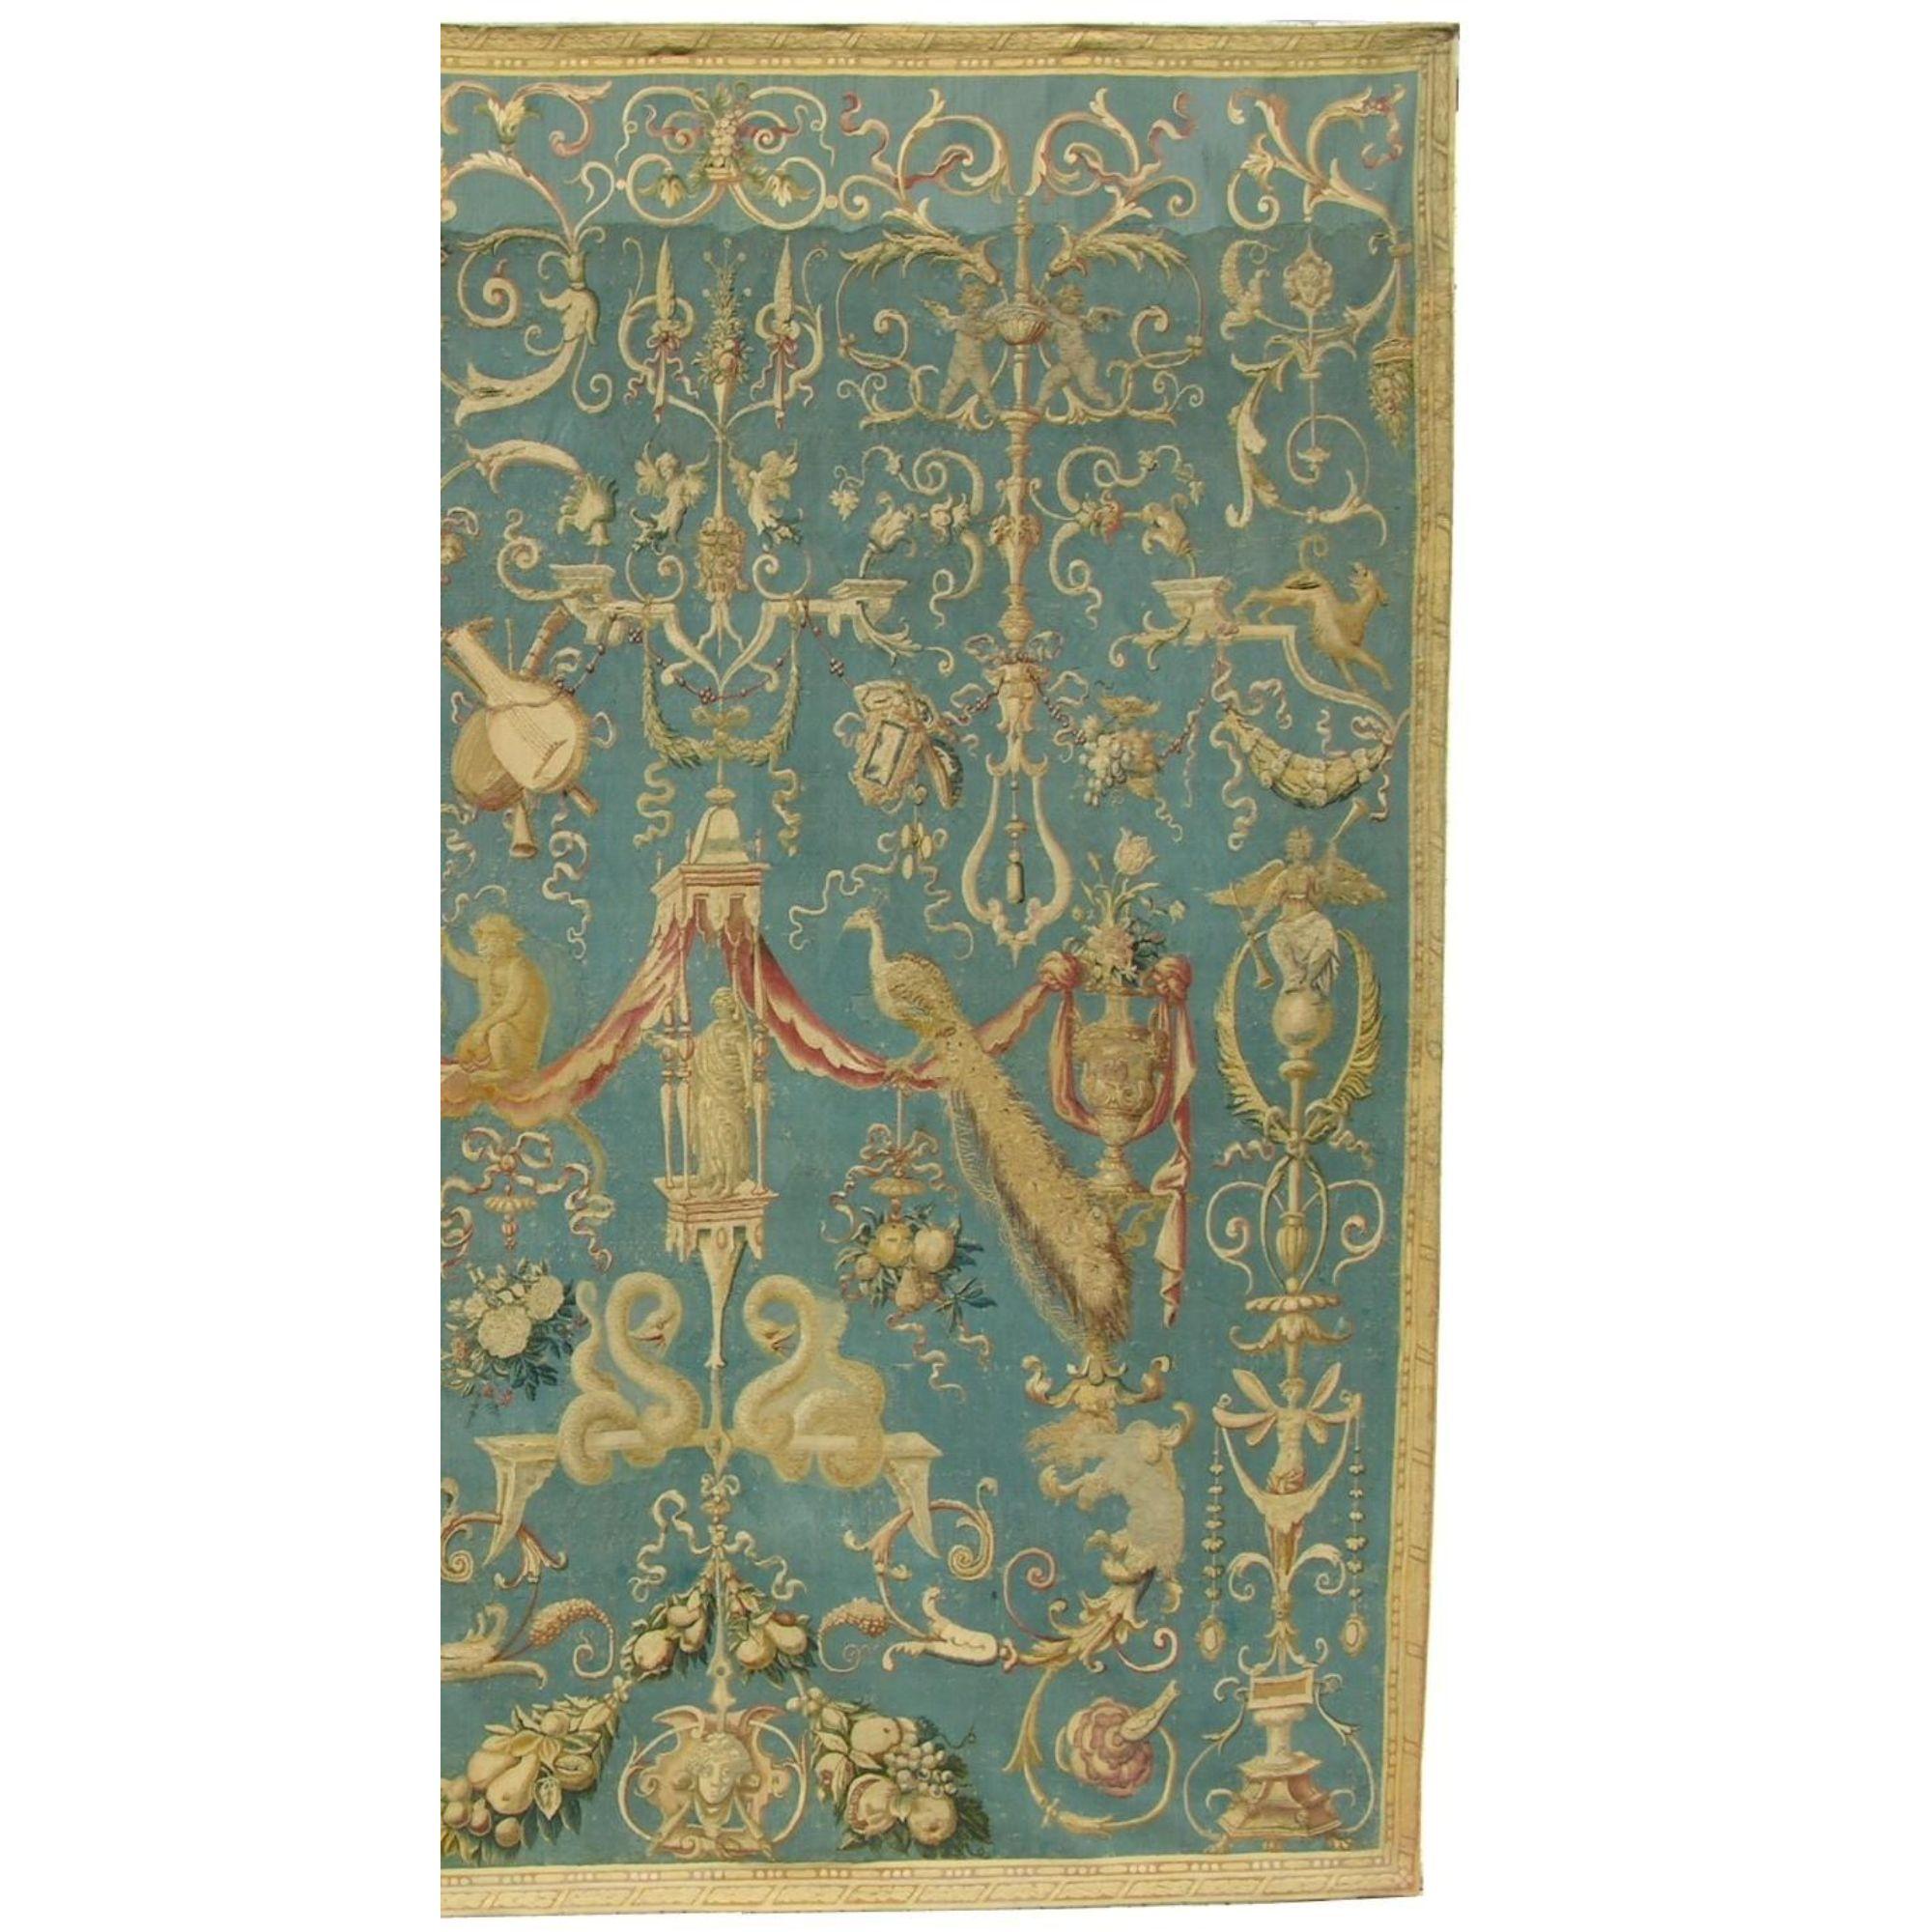 Unknown 18th Century French Tapestry 11'4